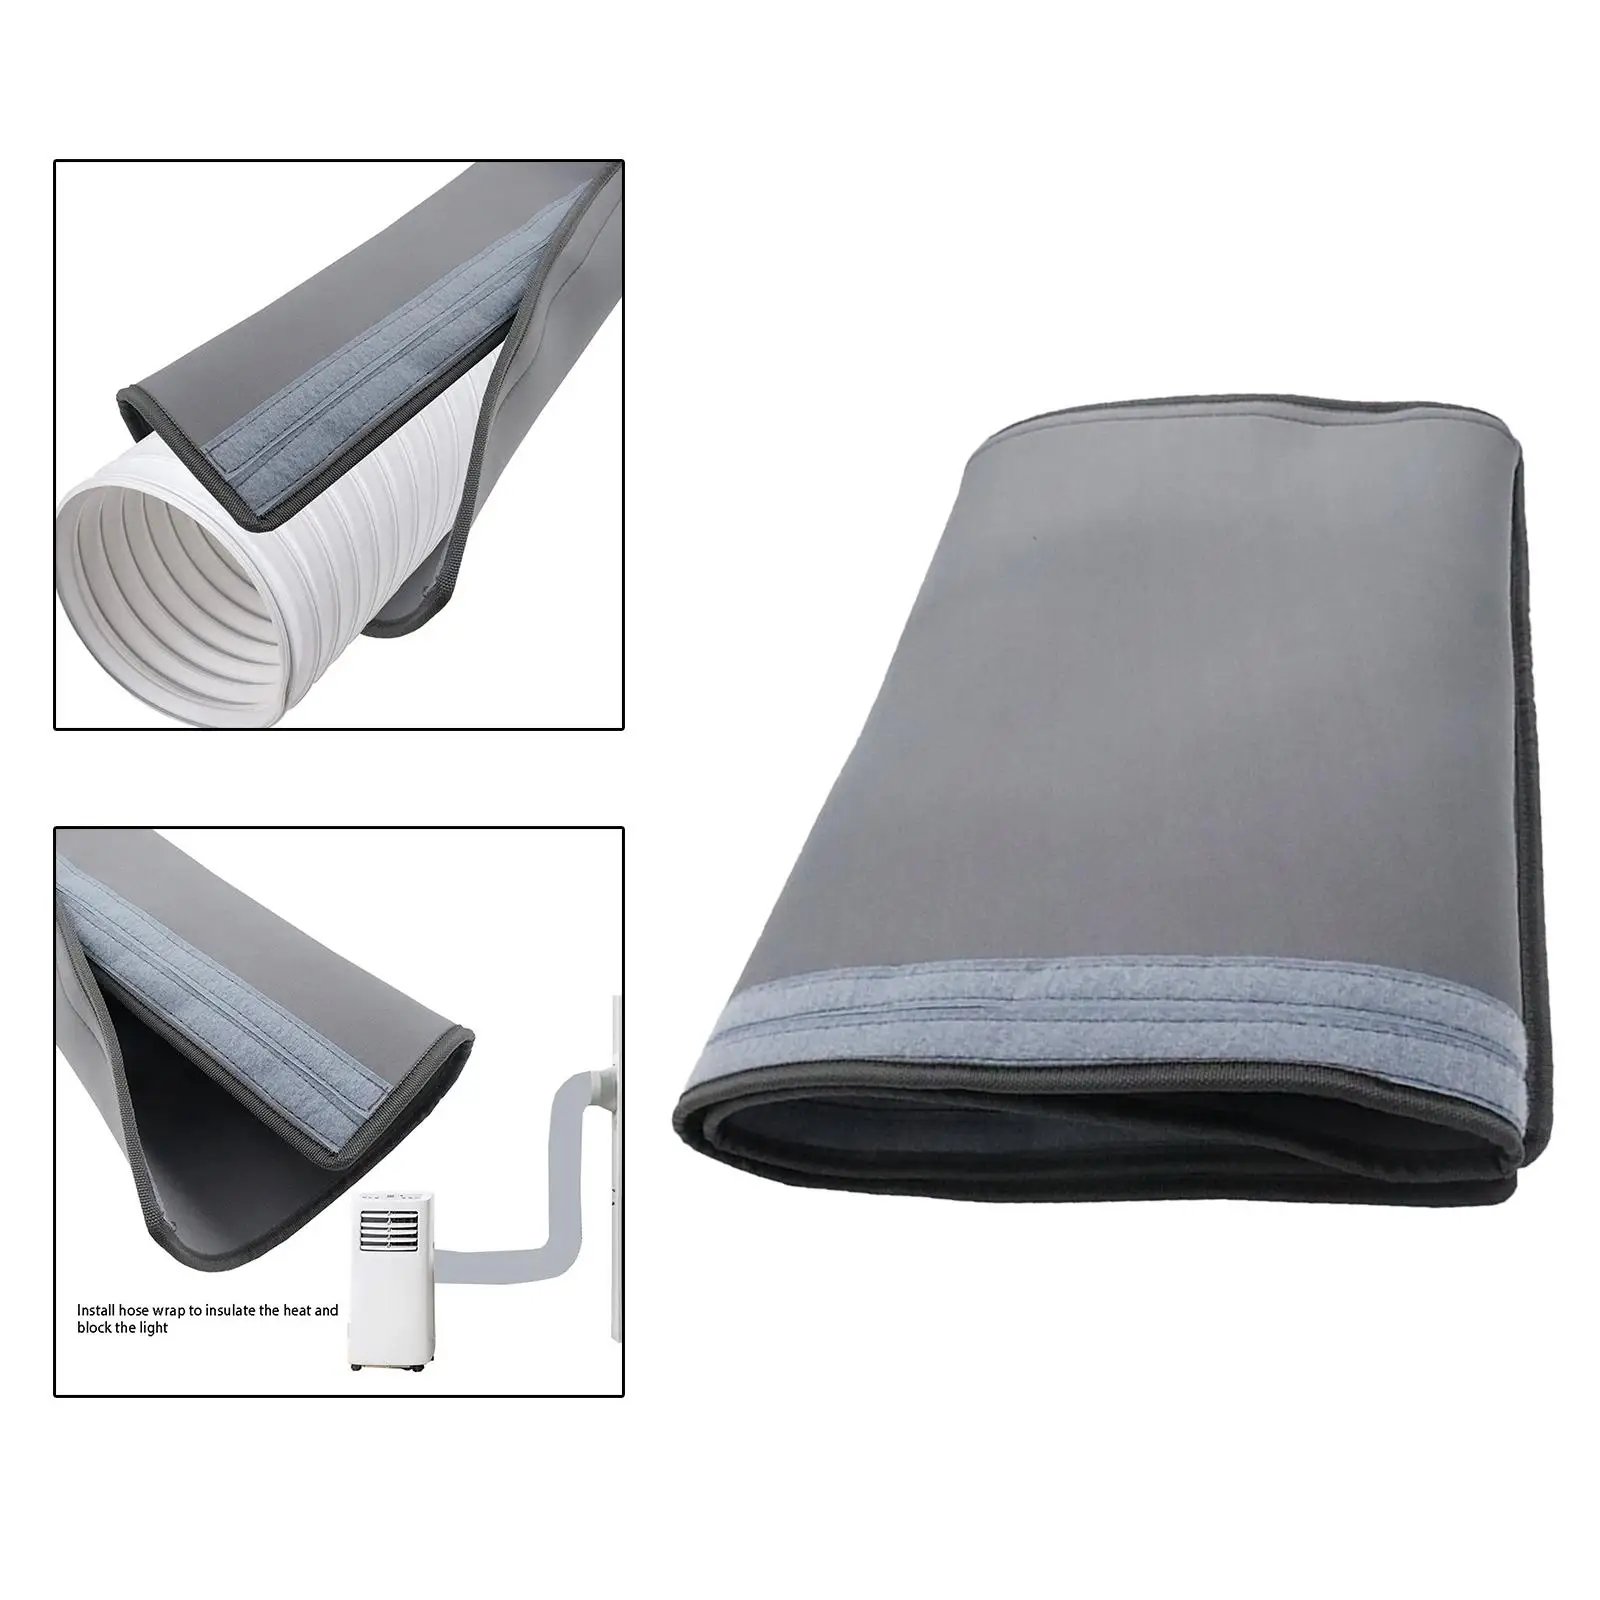 Portable Air Conditioner Hose Wrap Cover Dust Proof Protection Home Bedroom